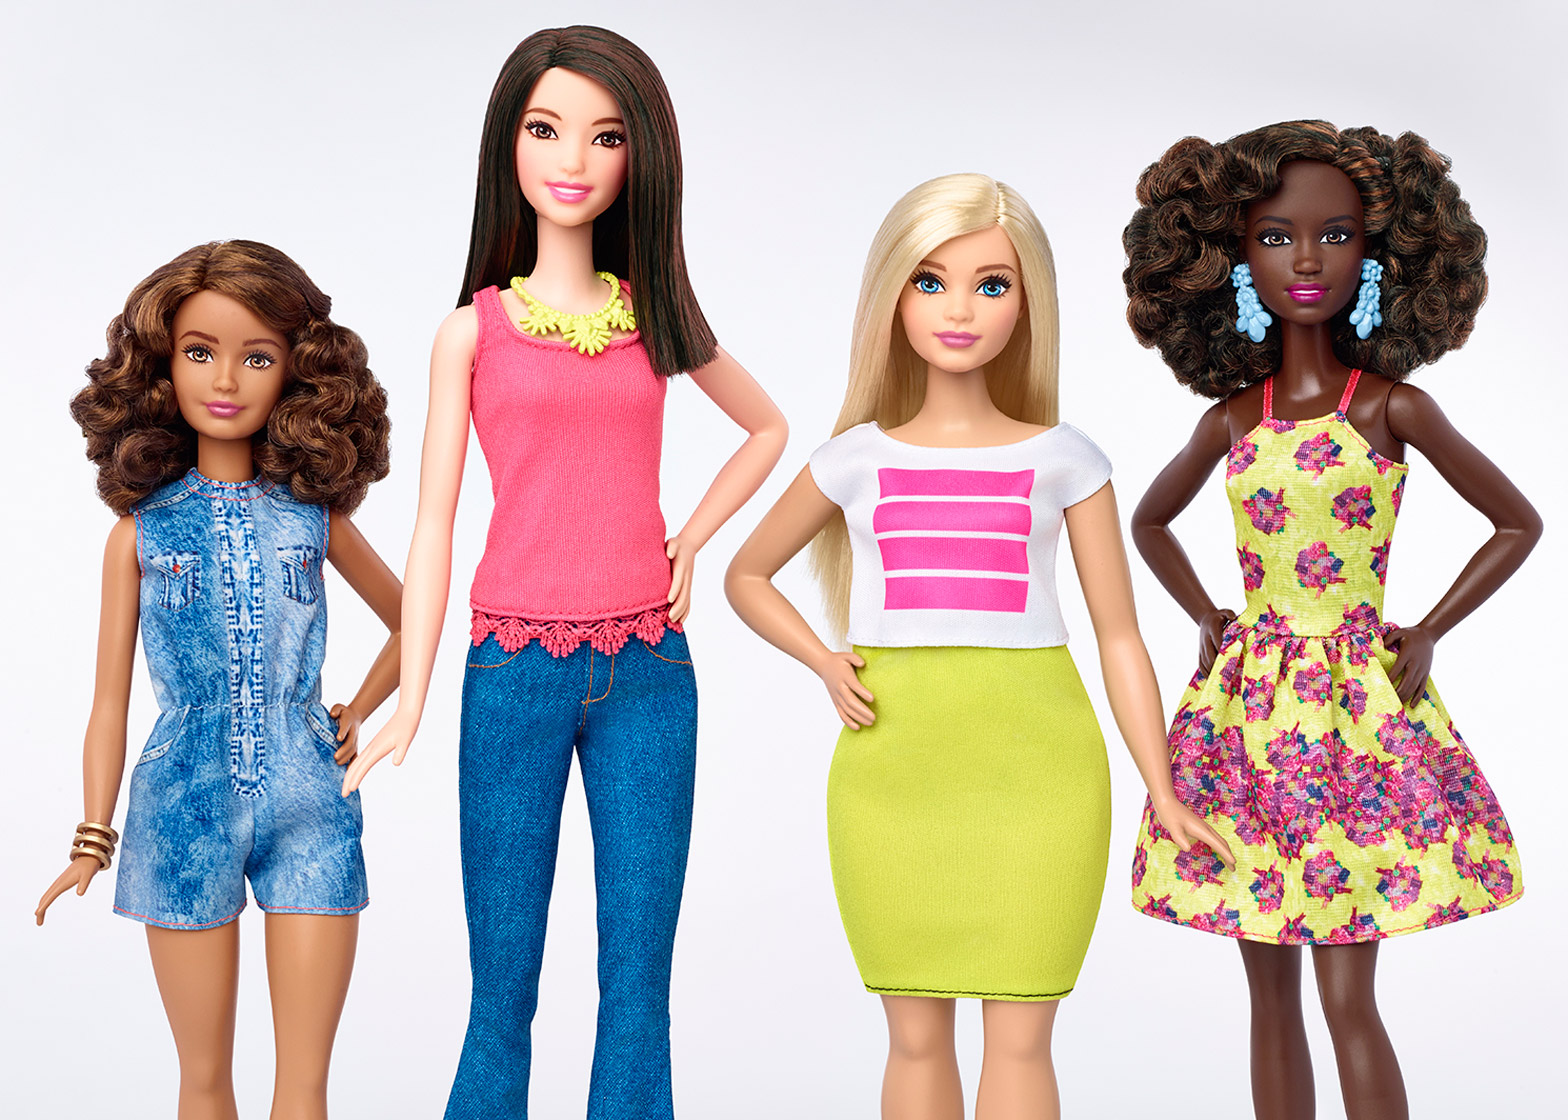 Barbie dolls now available in four body types